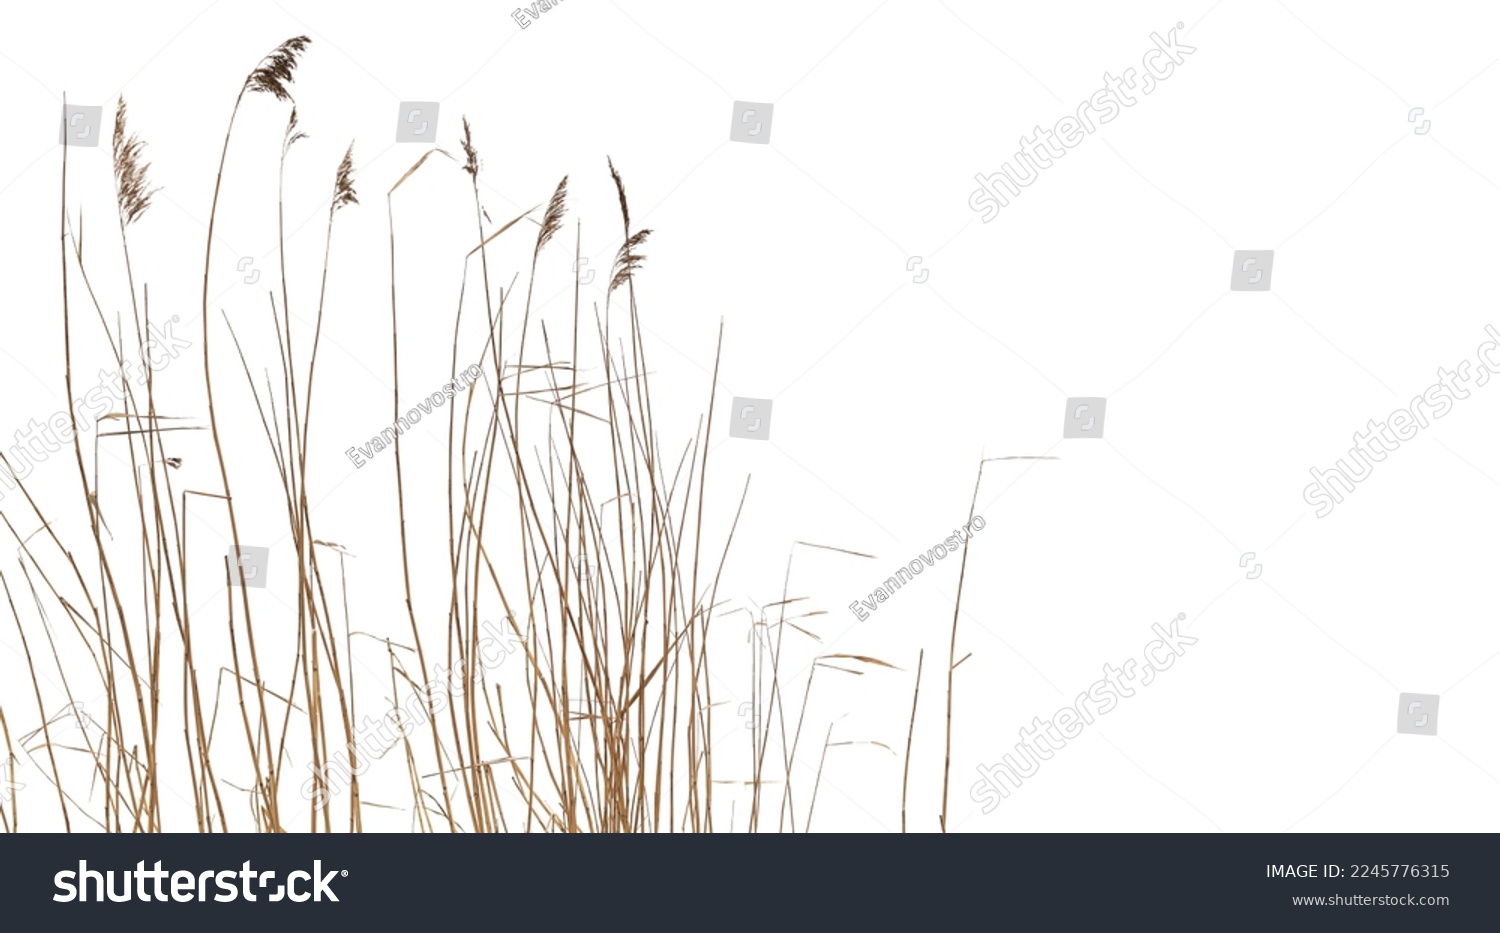 Dry coastal reed isolated on white background, natural winter photo #2245776315